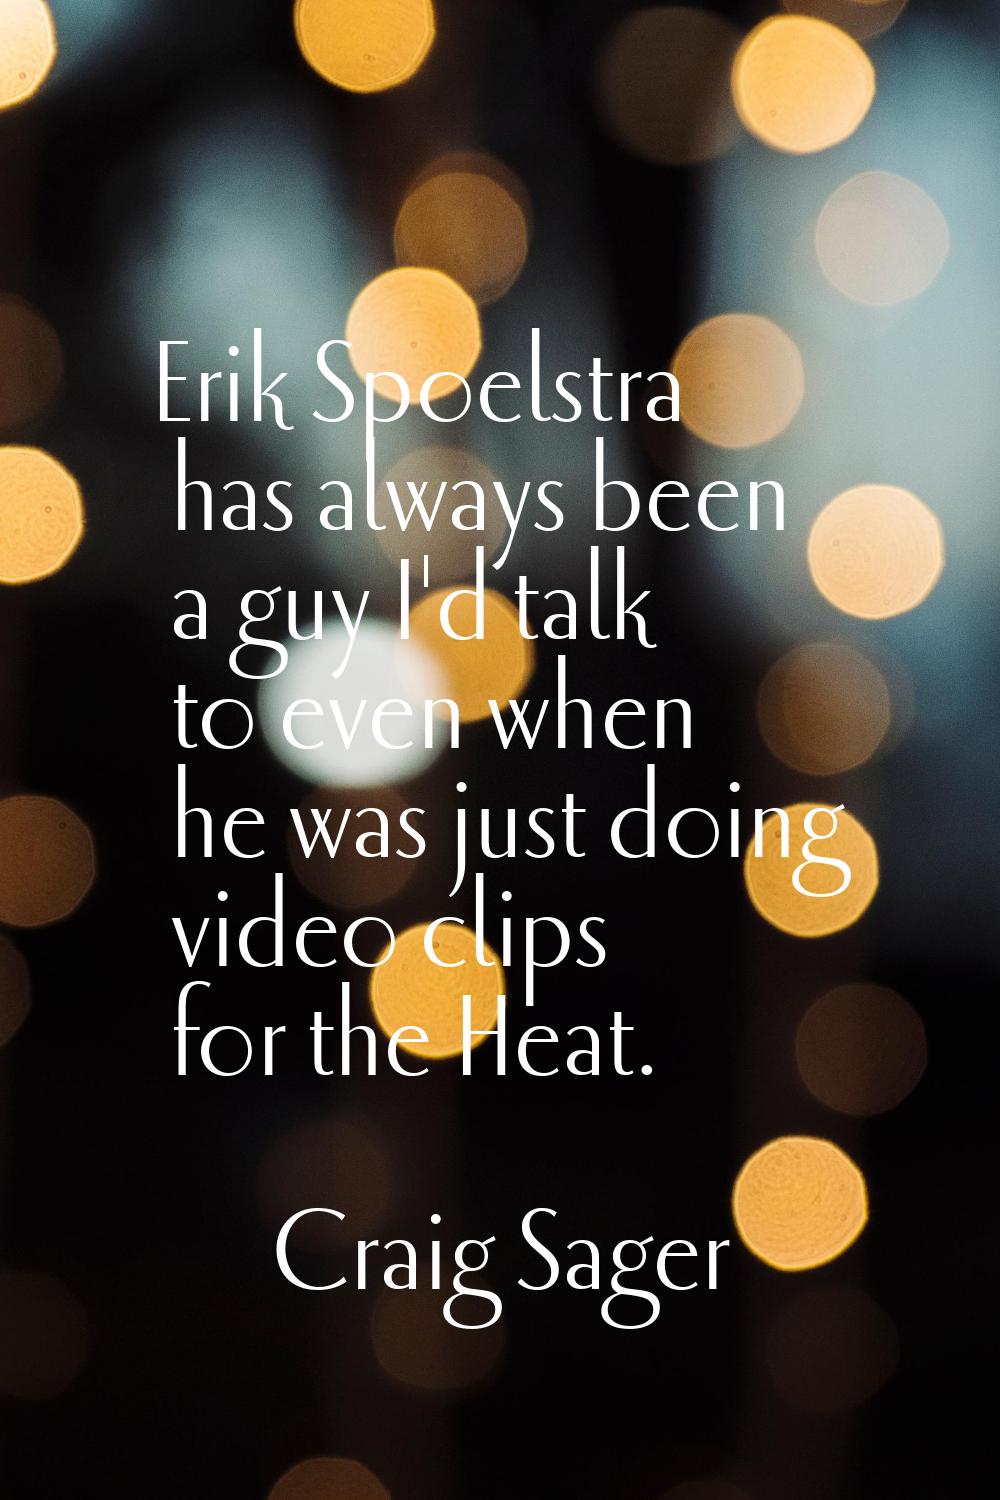 Erik Spoelstra has always been a guy I'd talk to even when he was just doing video clips for the He